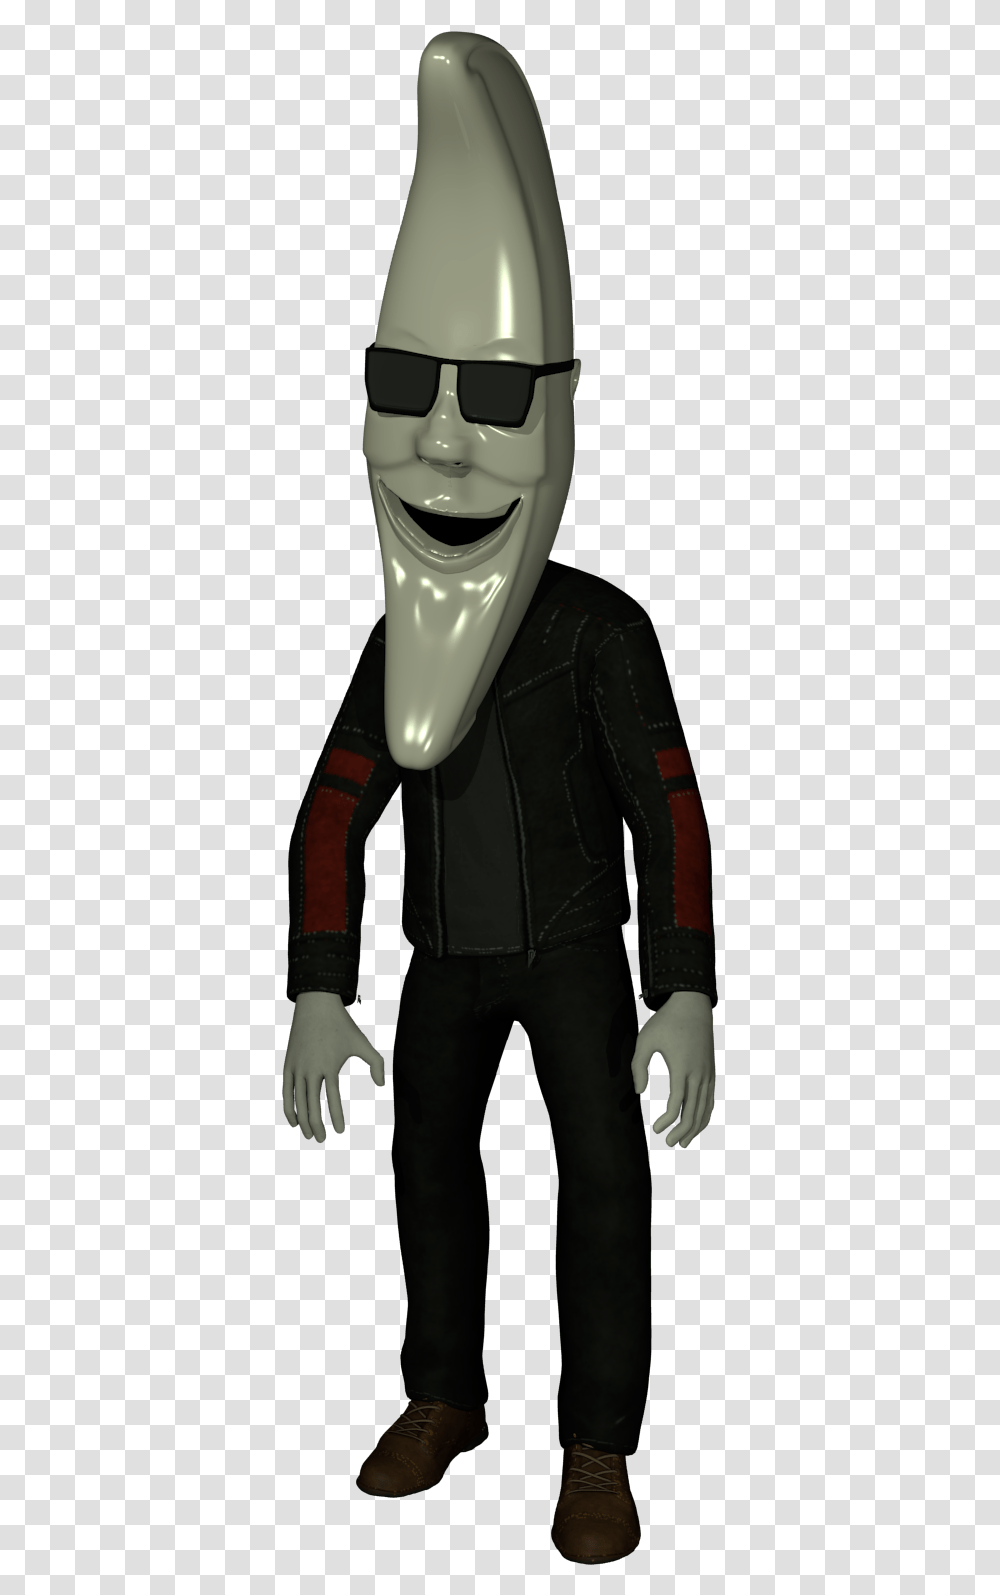 Official Five Nights With Mac Tonight Wiki Five Nights With Bud Rebooted, Apparel, Jacket, Coat Transparent Png